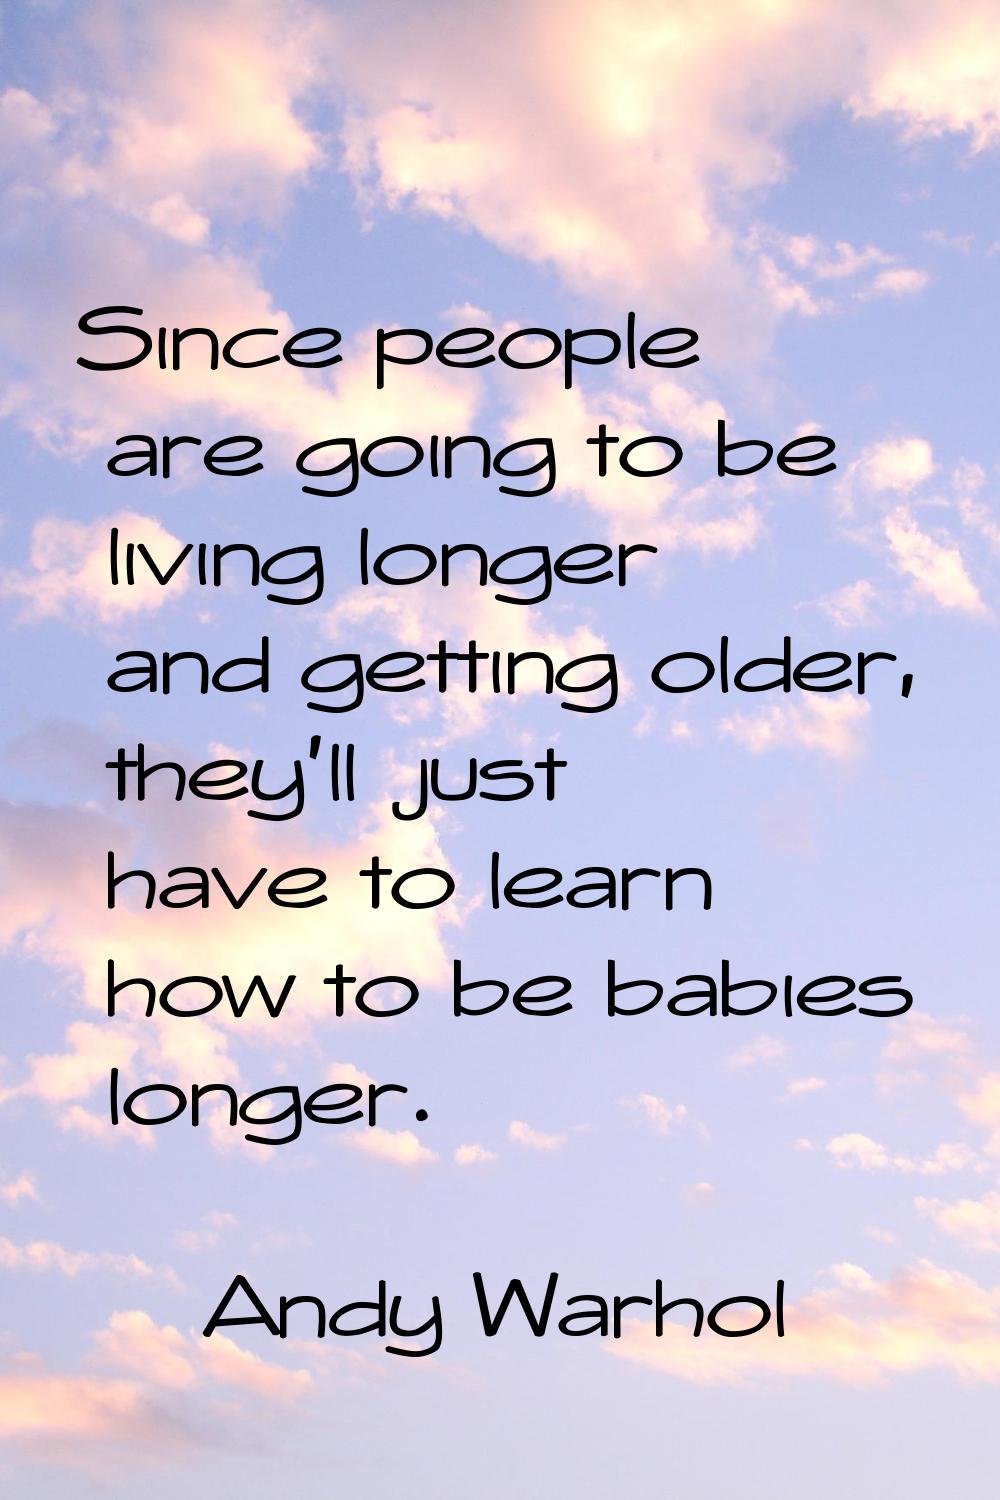 Since people are going to be living longer and getting older, they'll just have to learn how to be 